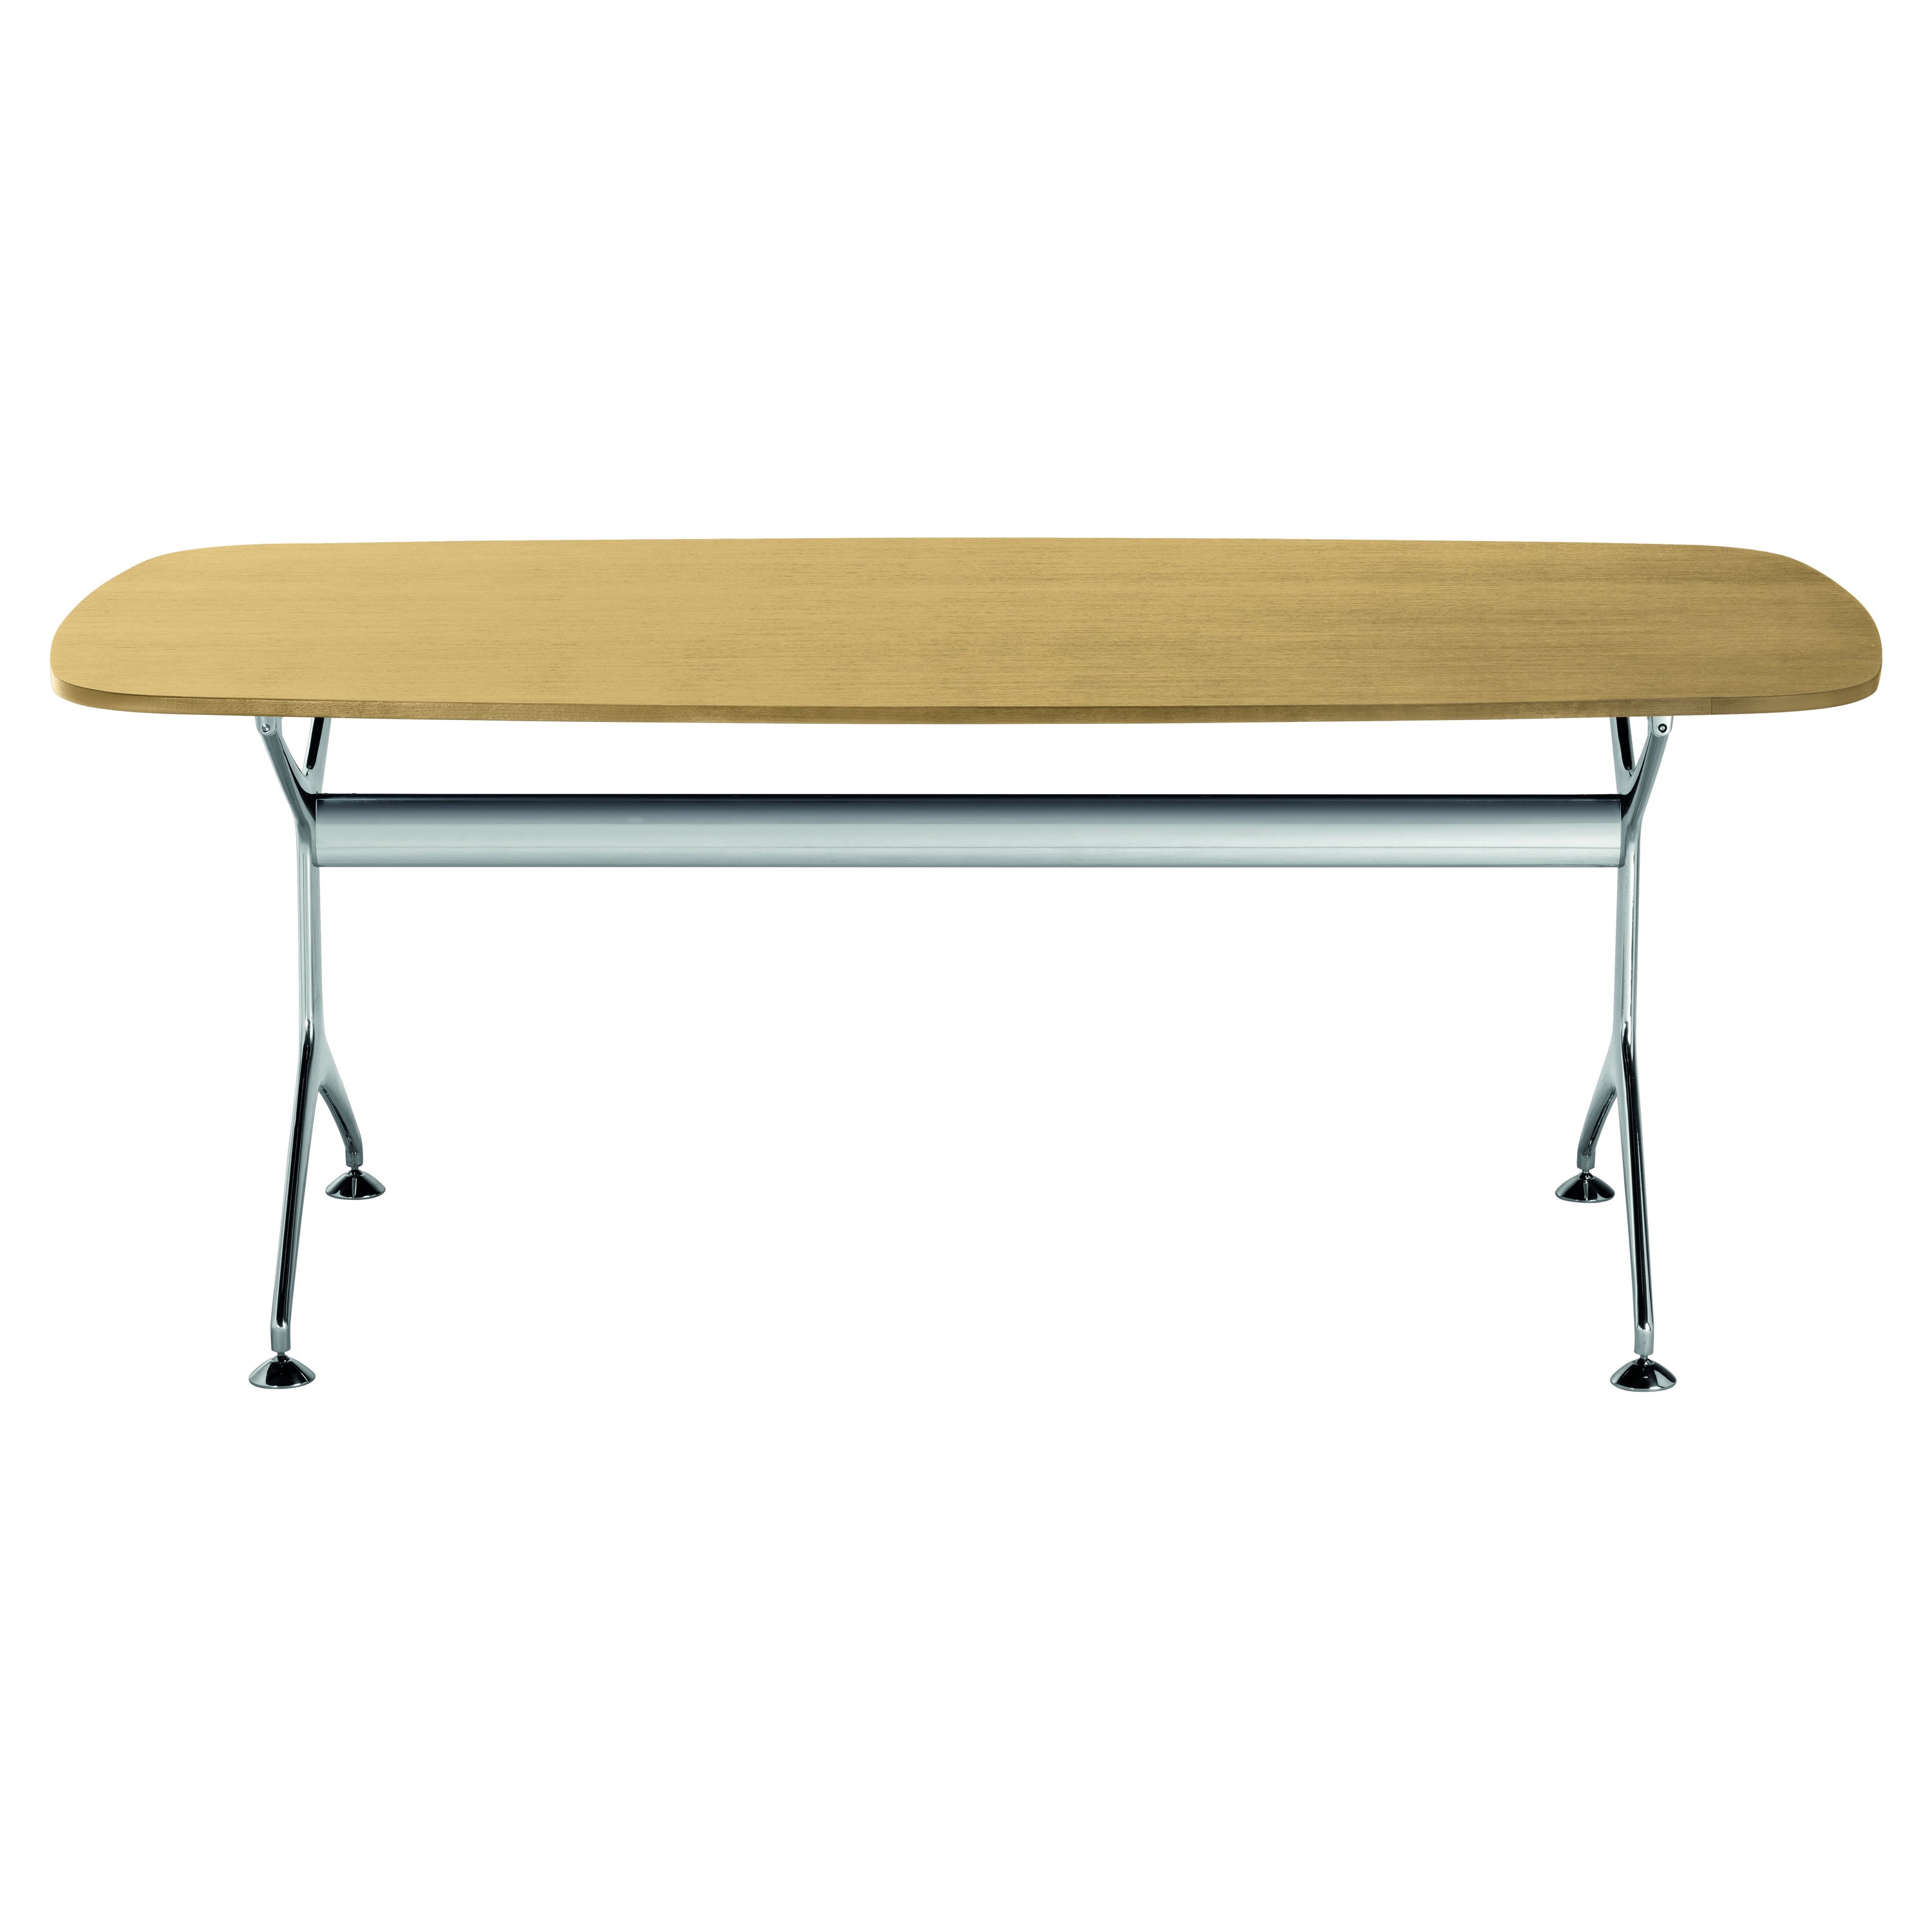 Alias Frametable 240 in Natural Oak Top with Aluminium Frame by Alberto Meda For Sale